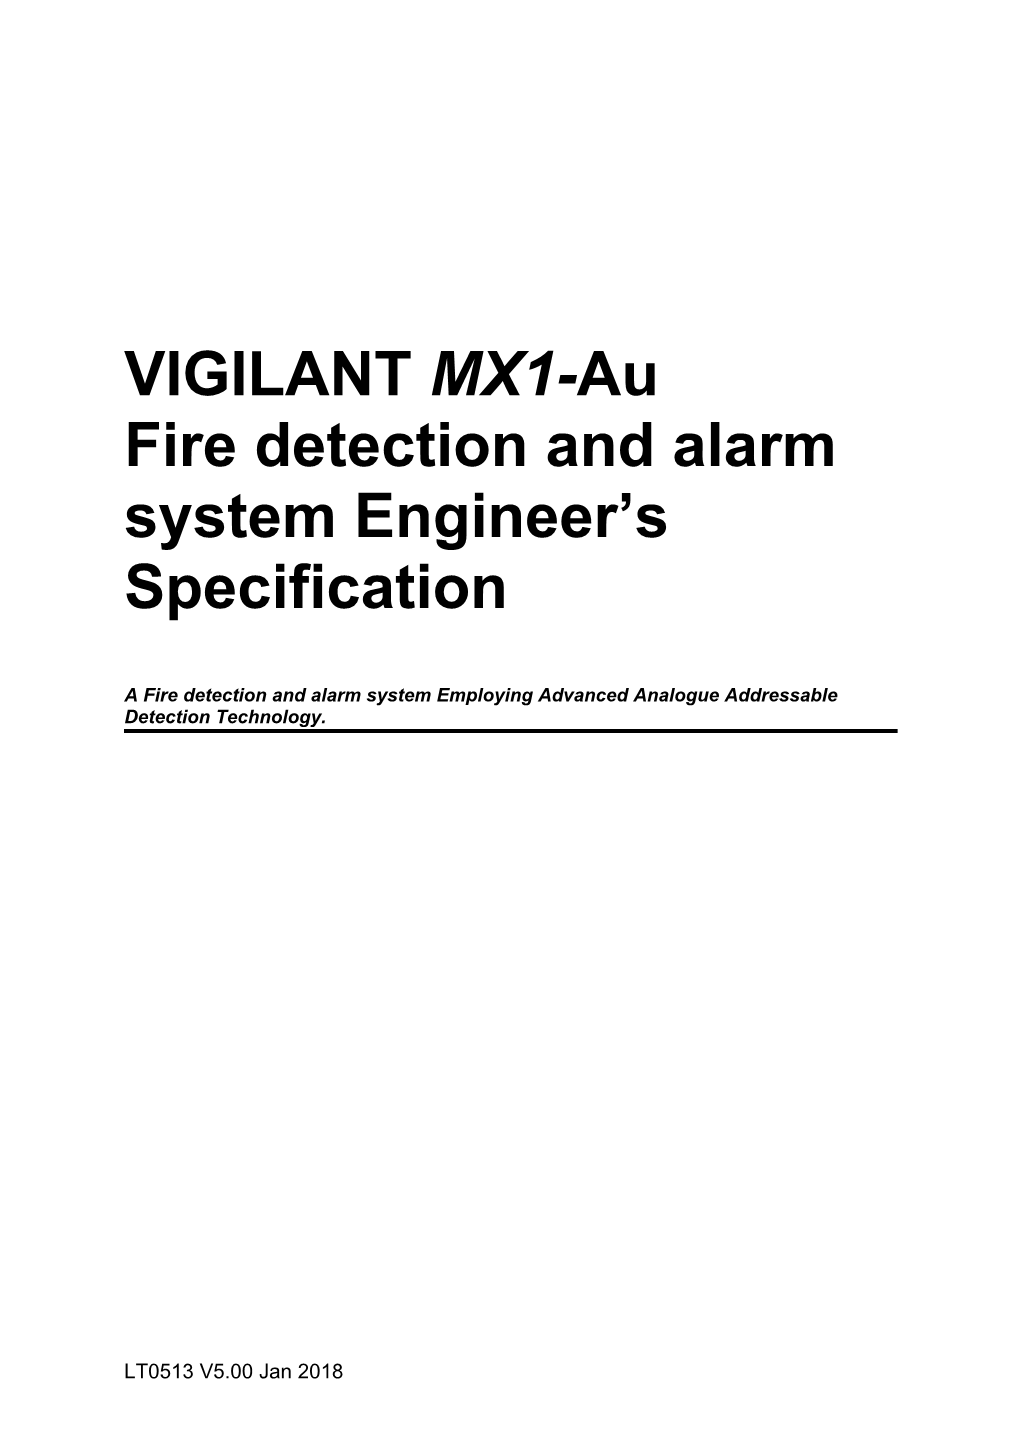 A Fire Detection and Alarm System Employing Advanced Analogue Addressable Detection Technology